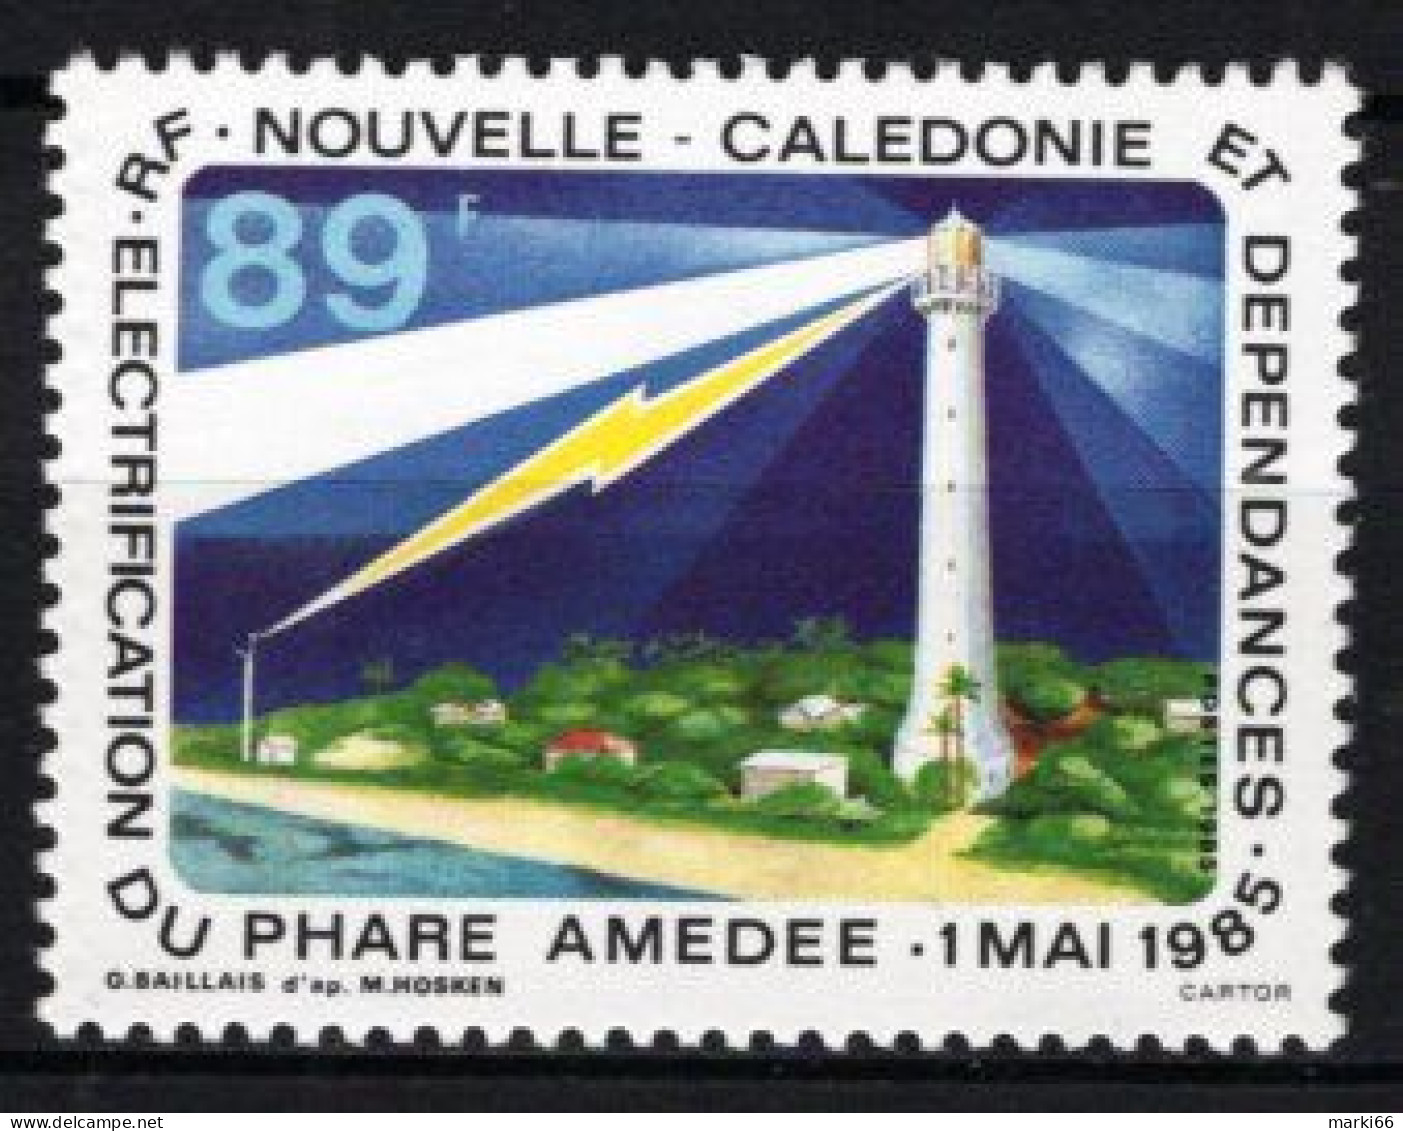 New Caledonia - 1985 - Electrification Amedee Lighthouse In 1985 - Mint Stamp - Nuevos